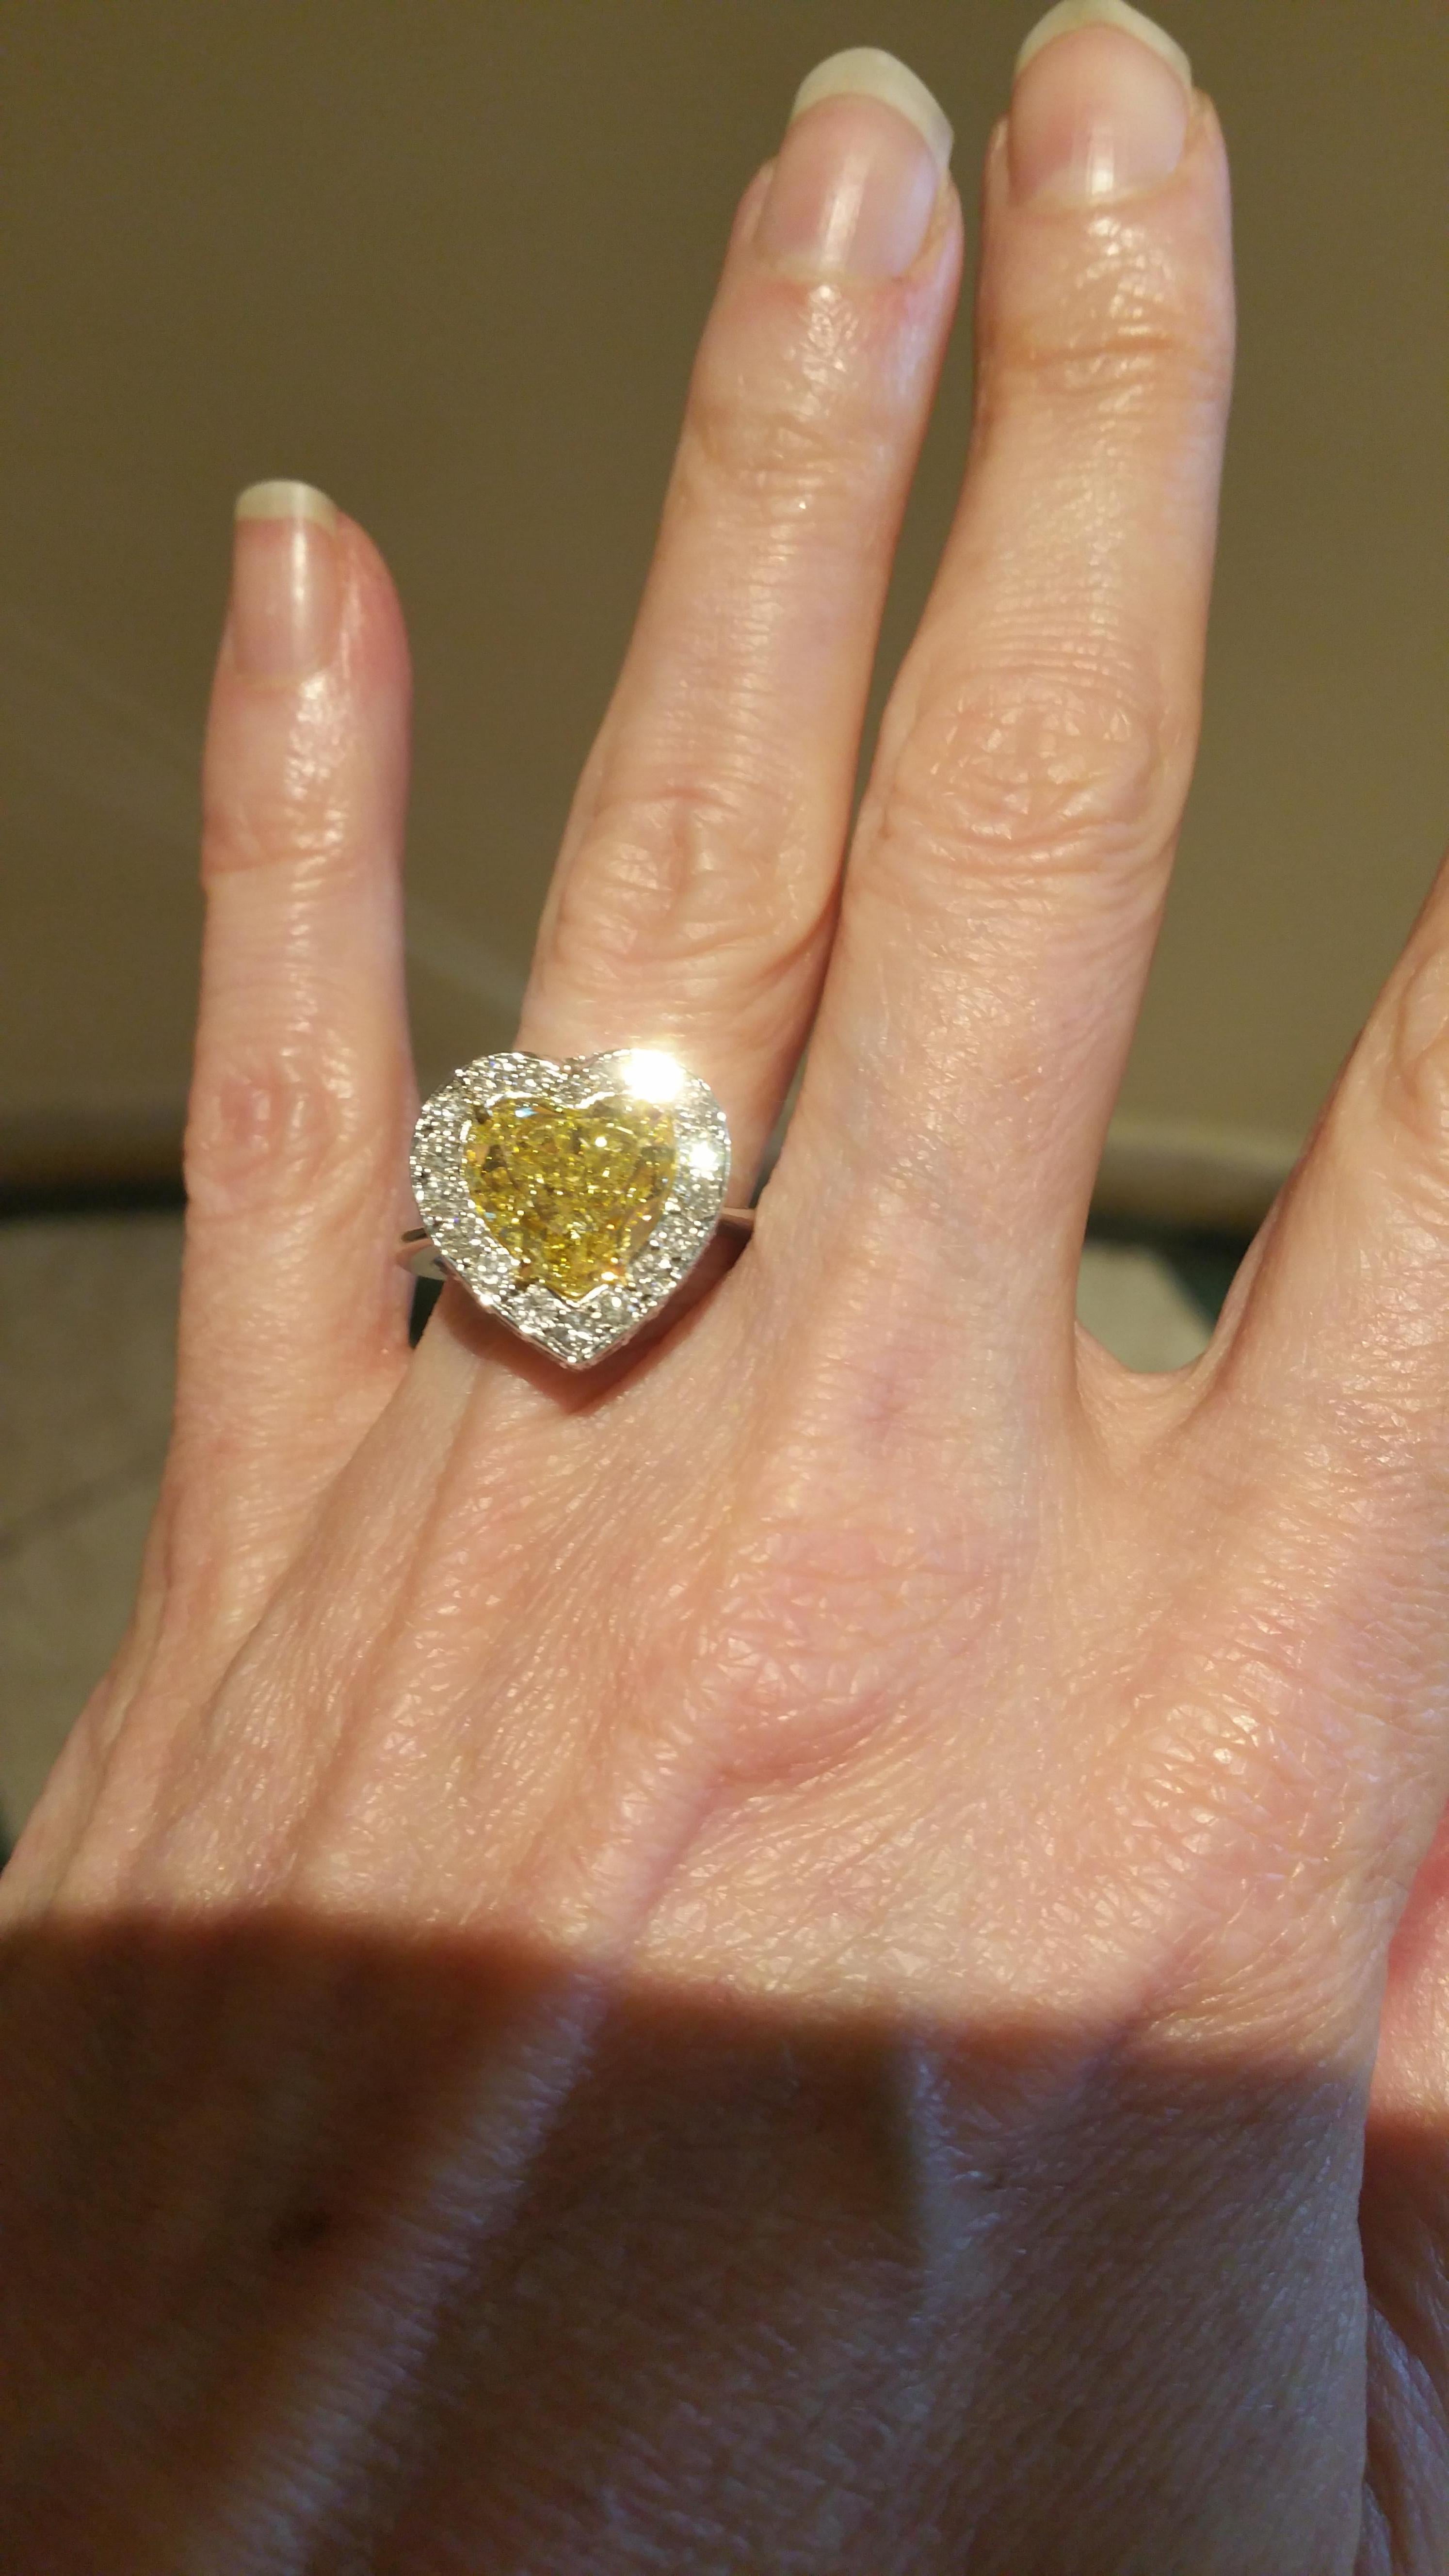 Contemporary Scarselli GIA 5 carat Intense Yellow Heart Shape Diamond Ring in Platinum For Sale